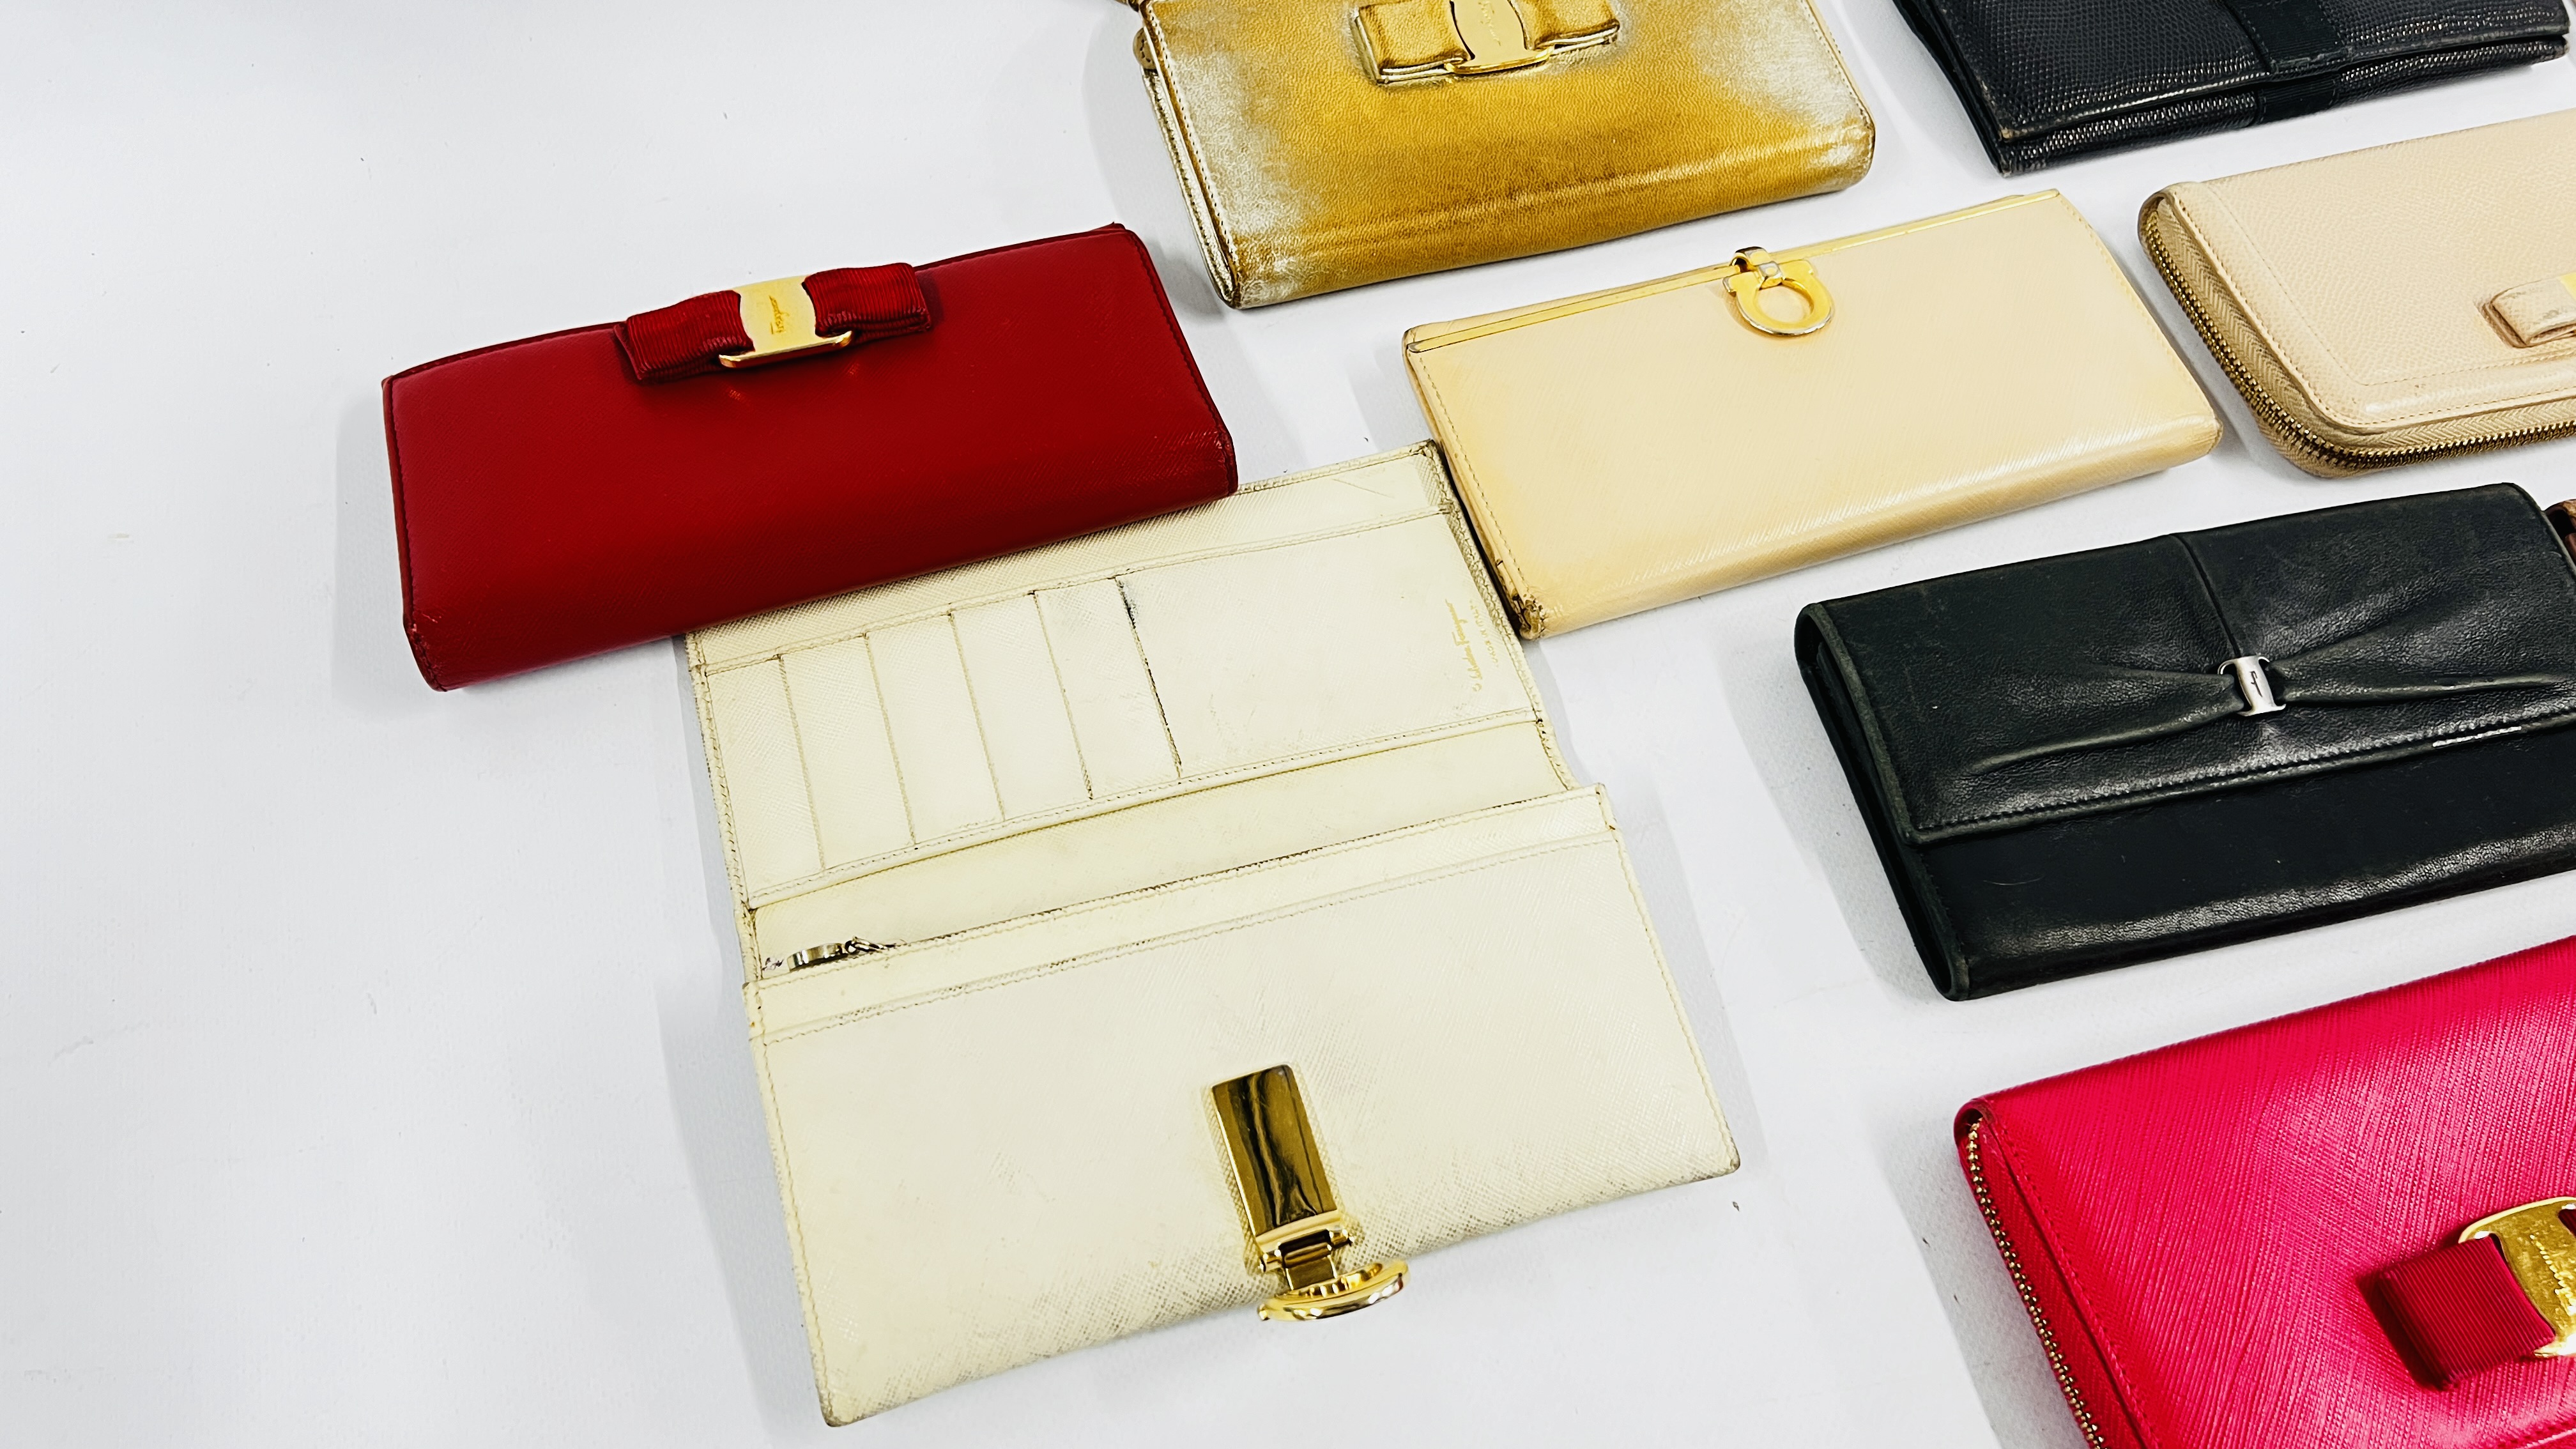 A COLLECTION OF 11 DESIGNER PURSES MARKED "SALVADOR FERRAGAMA". - Image 2 of 6